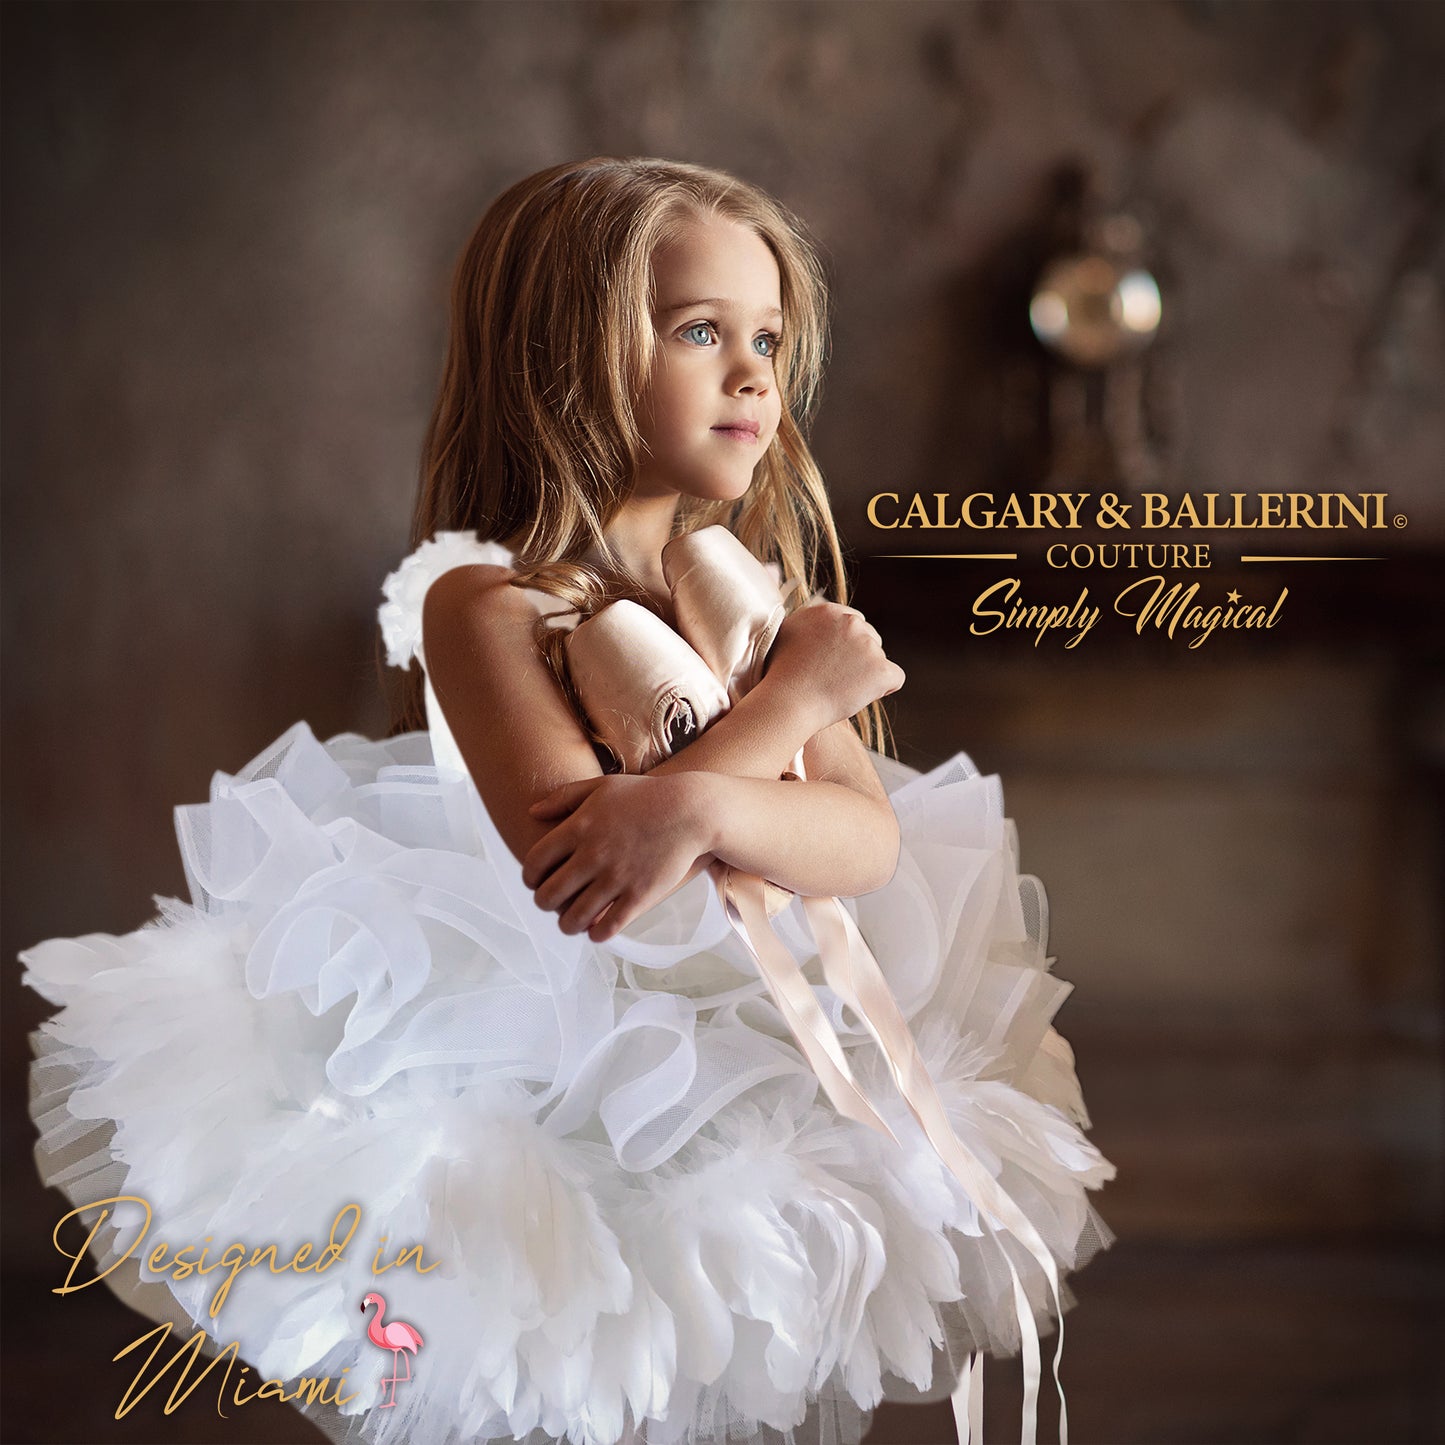 The white tutu dress for girls is a sweet, special occasion favorite. The "Tiffany" in the color "Snow" combines white ballerina style with a classic and sophisticated look. This white knee-length tutu has delicate ruffle shoulders on the bodice and a full feather skirt